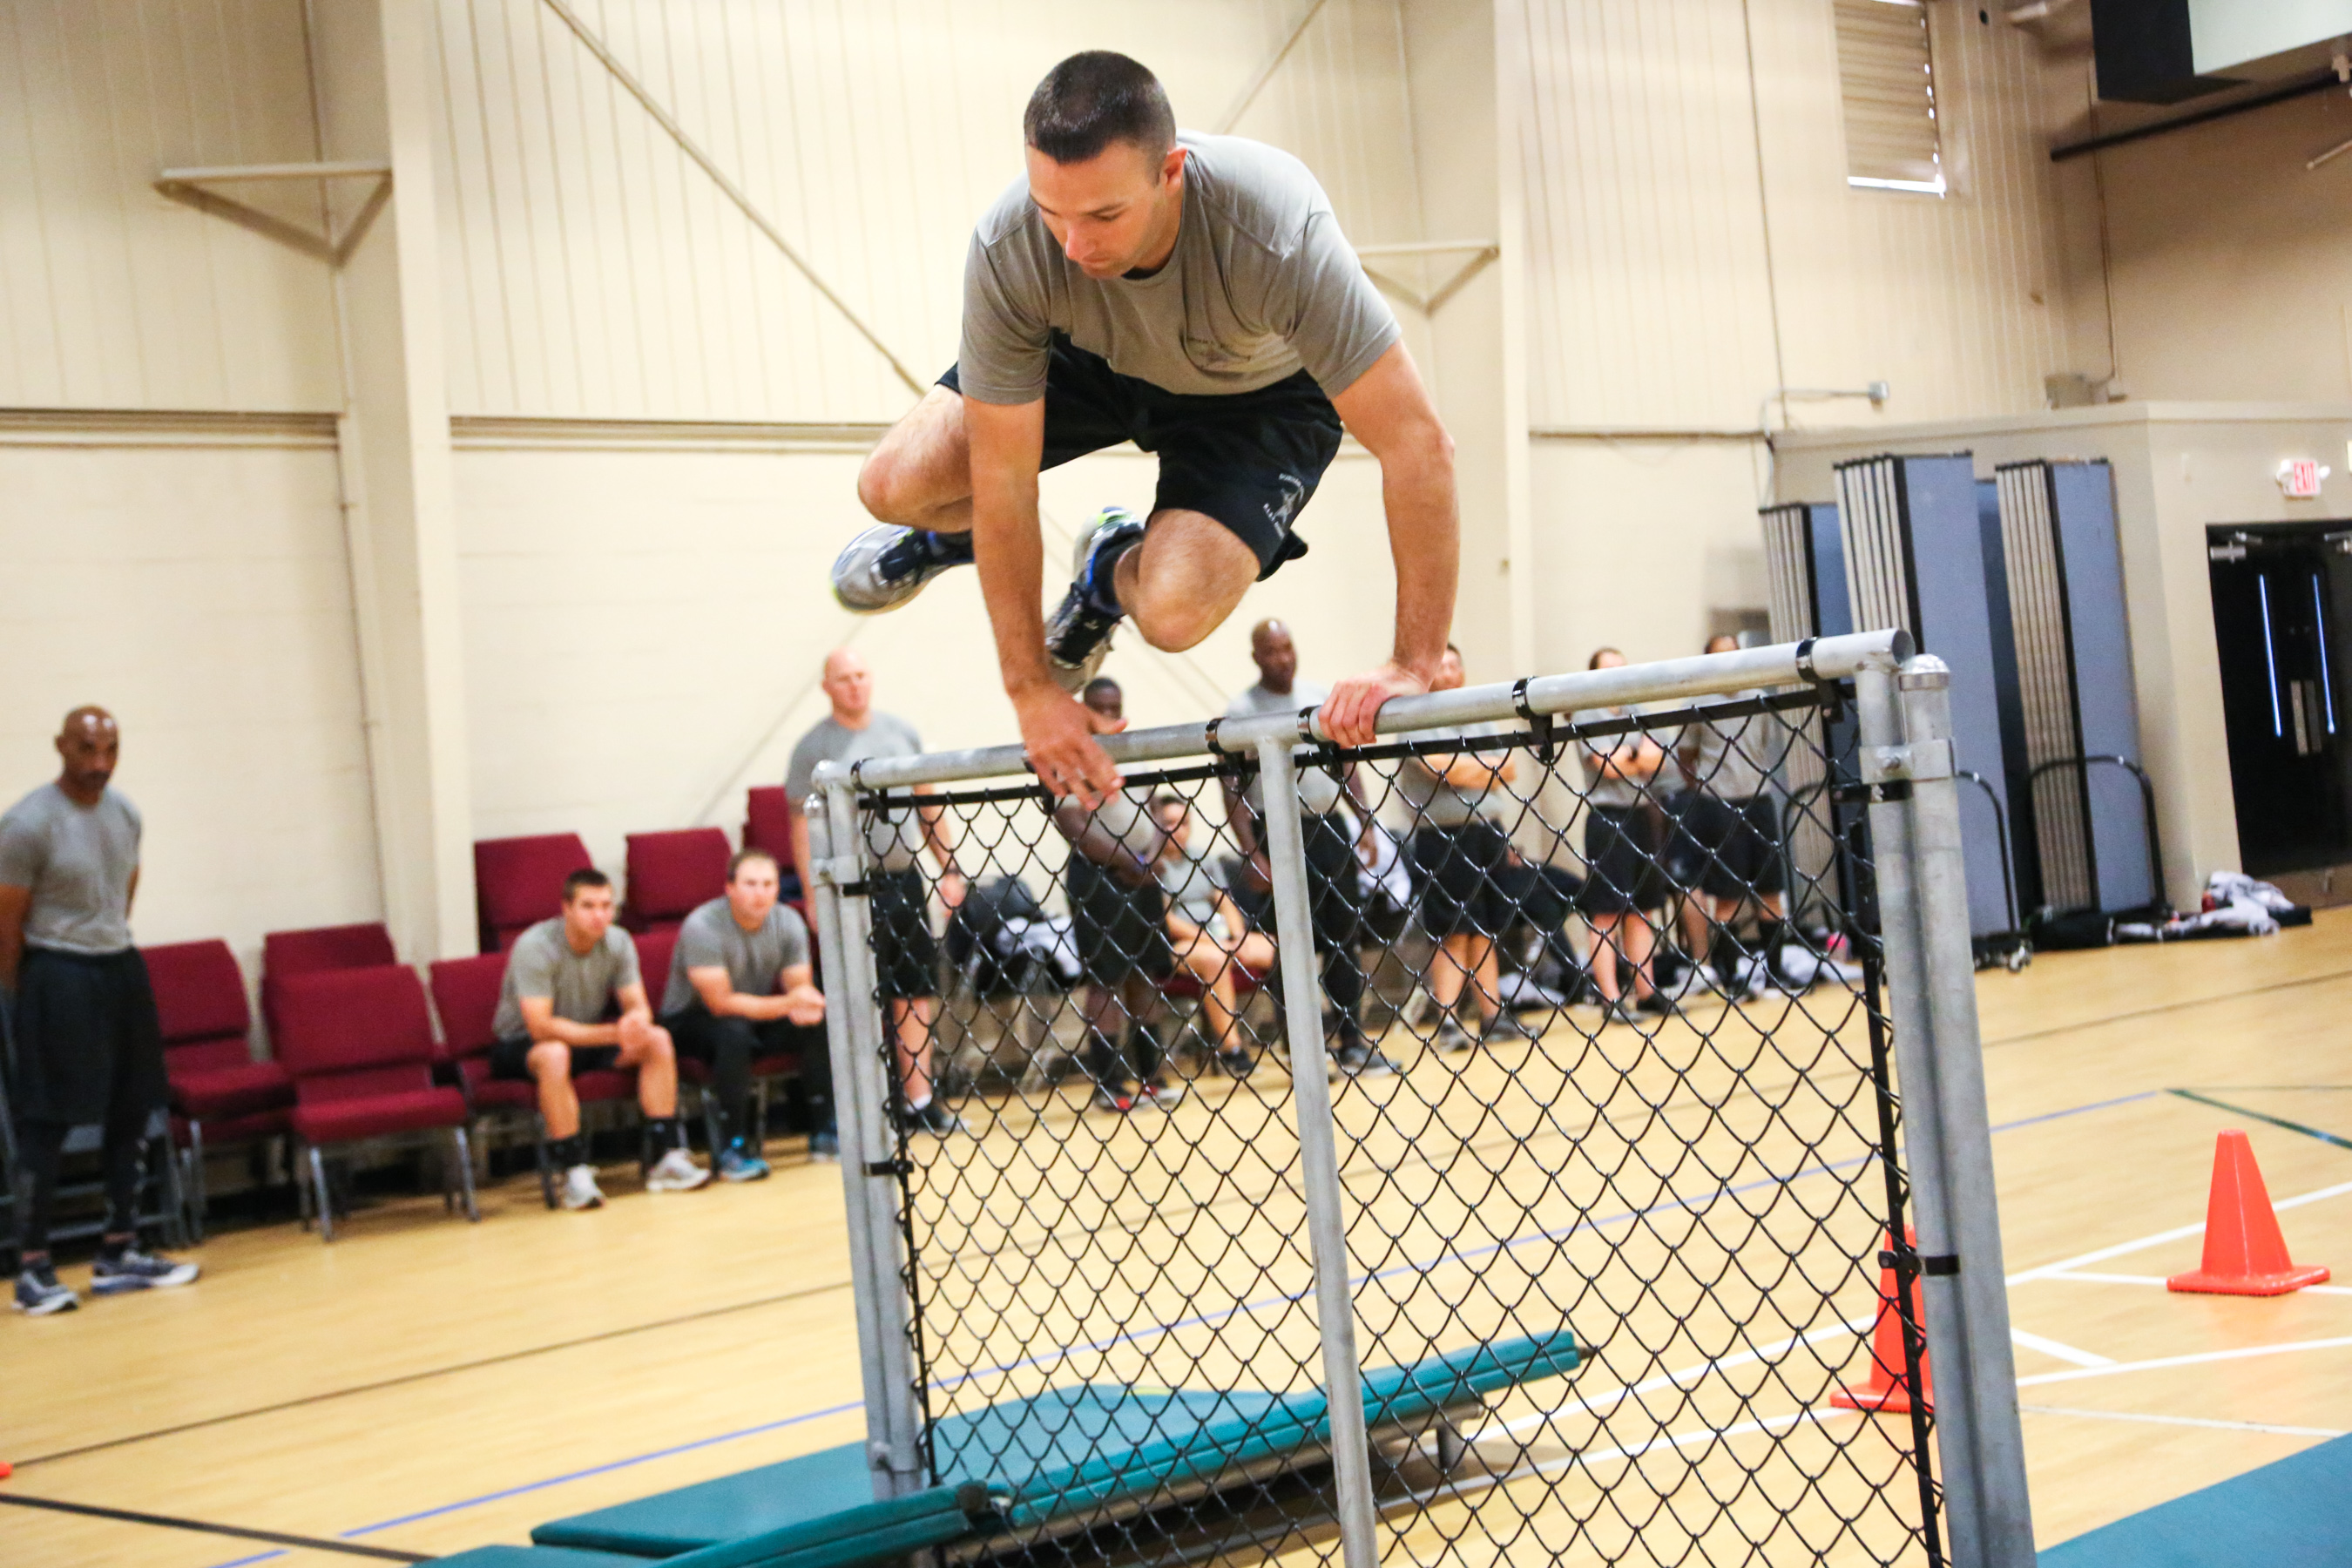 Deputy recruit leaping over a piece of fence in a gym